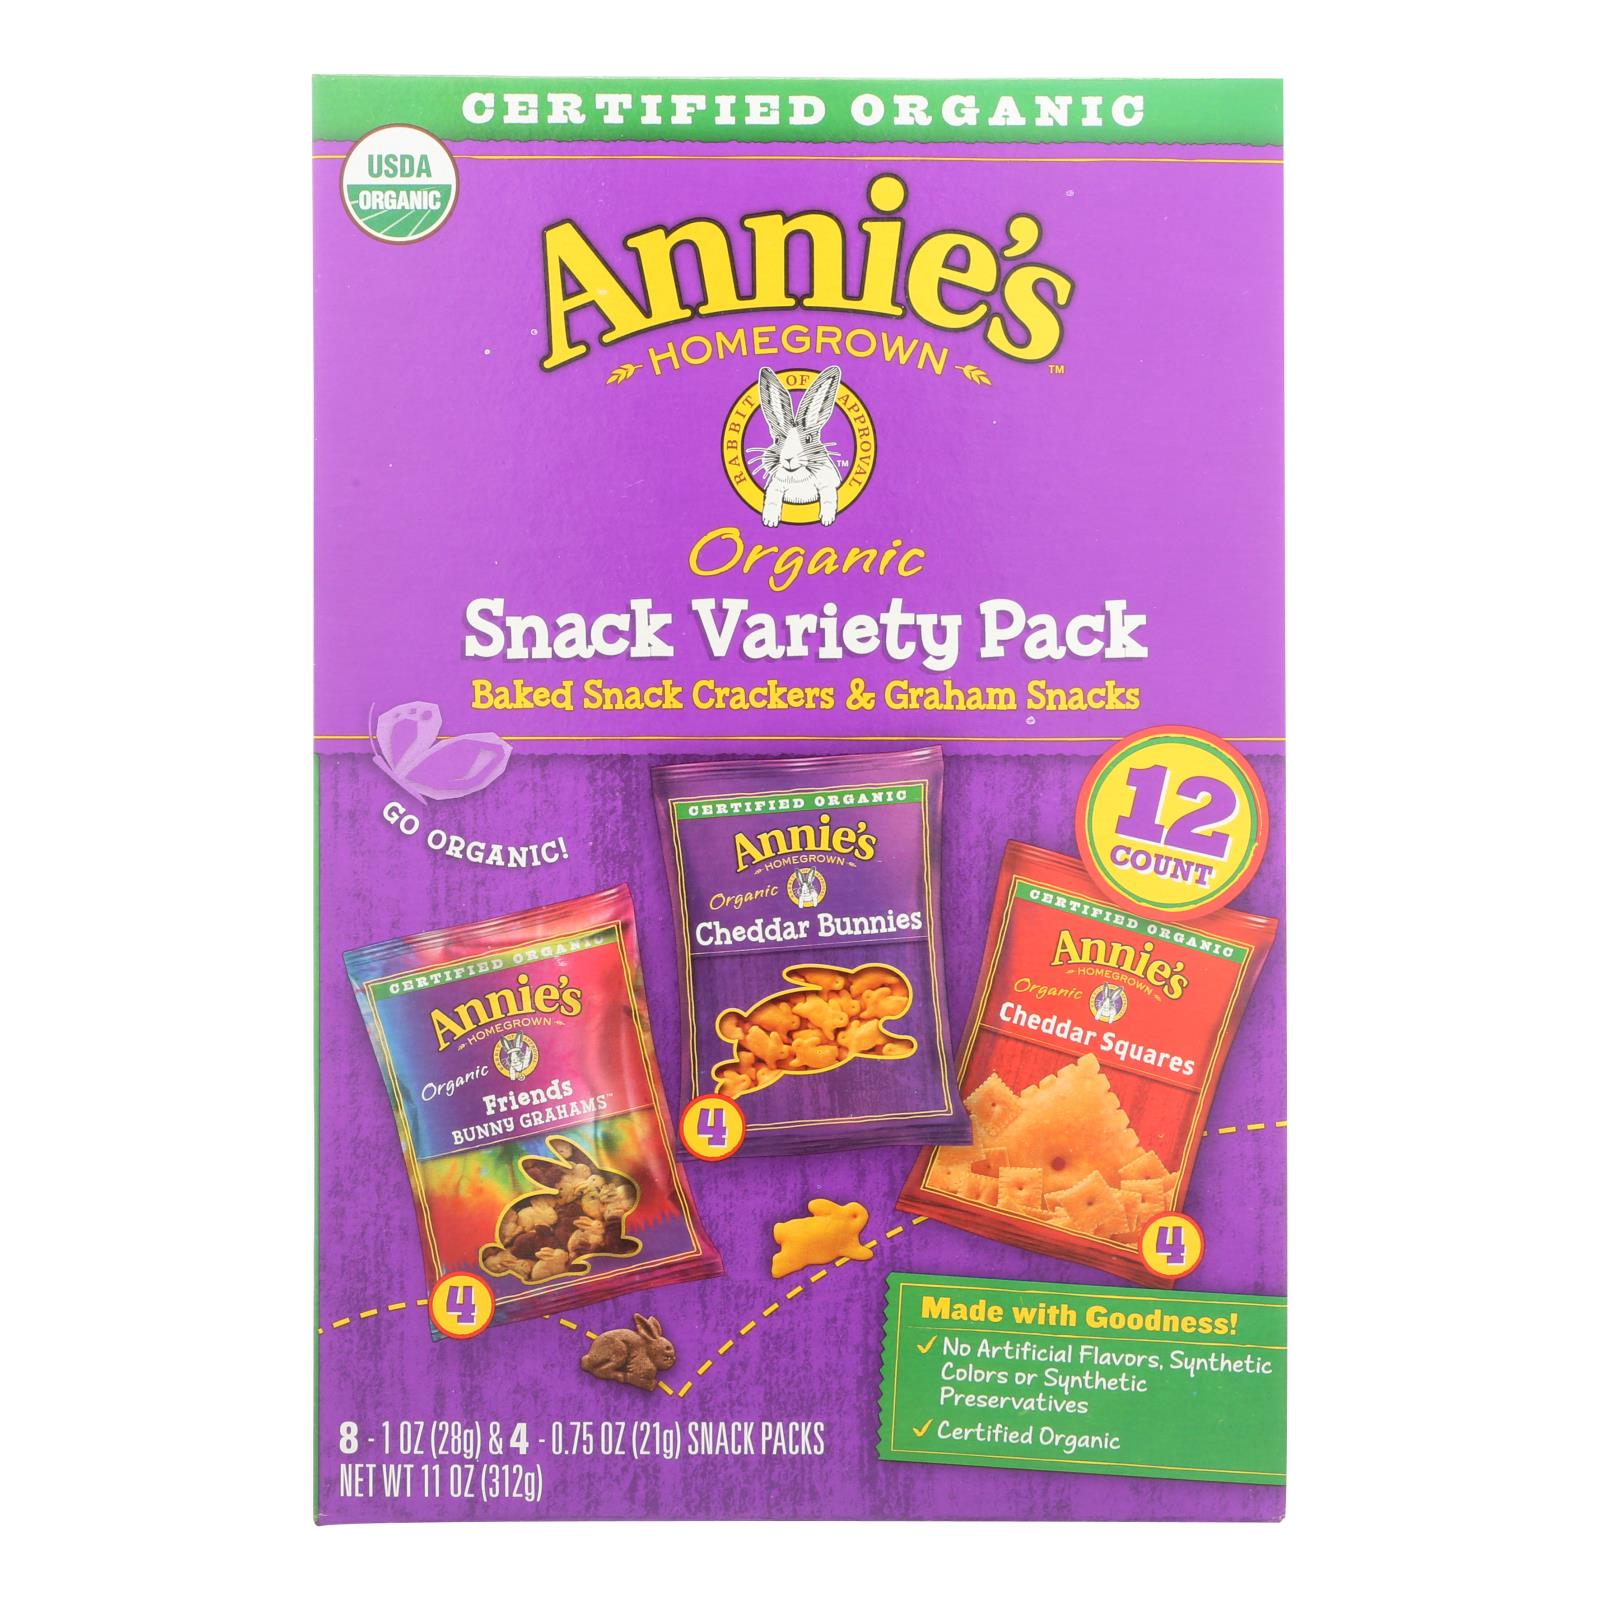 Annie'S Homegrown, Annie's Homegrown Snack Pack - Organic - Variety - 12Ct - Case of 6 - 12 count (Pack of 6)